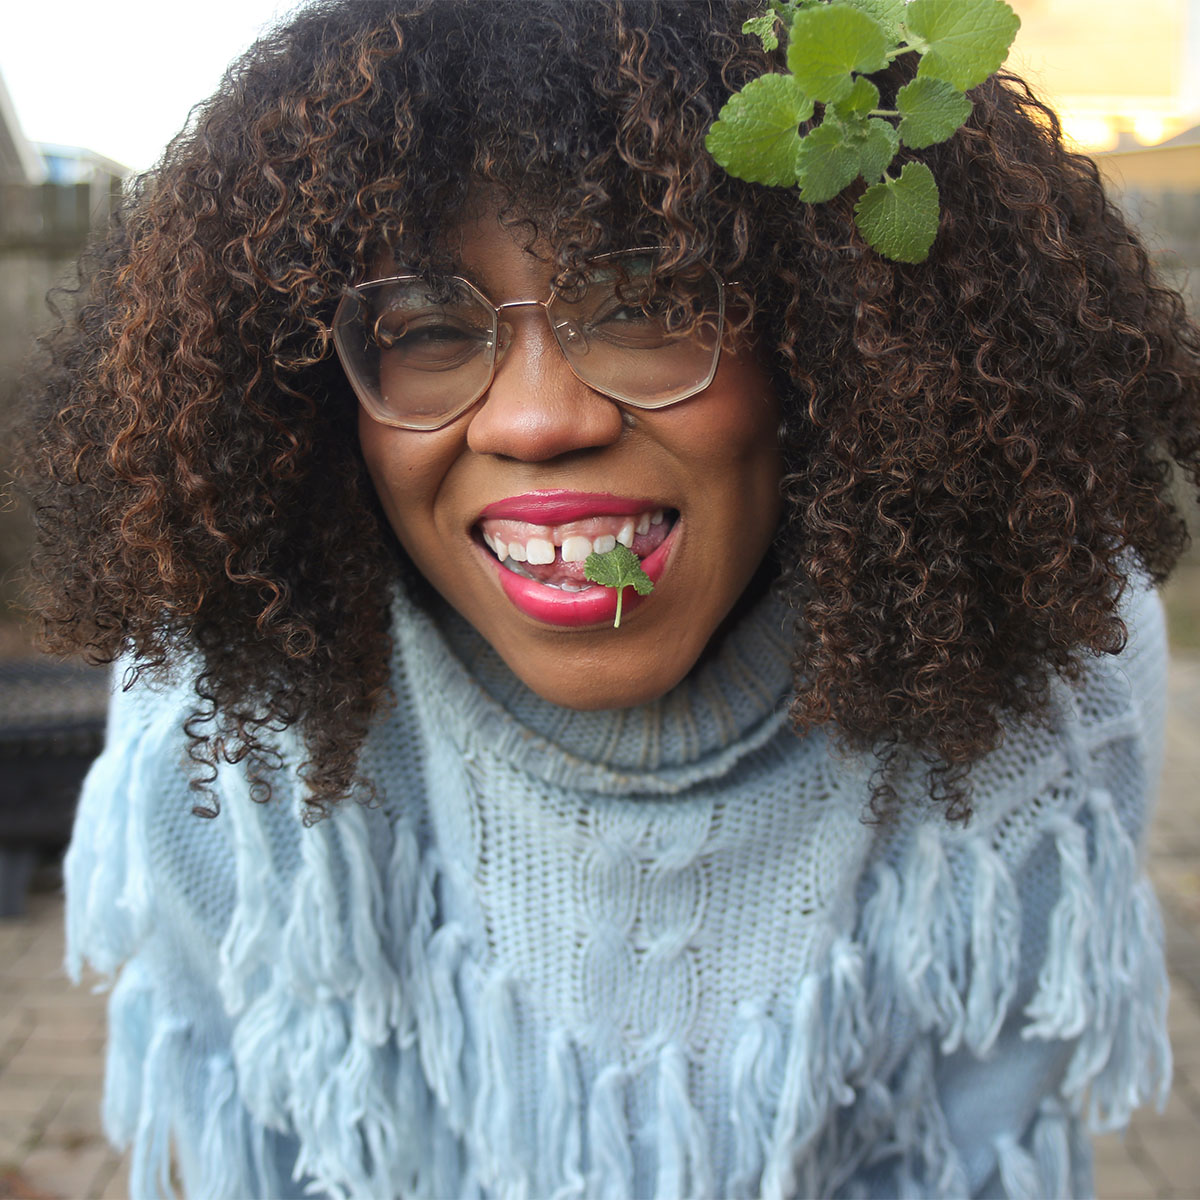 Alexis Nikole Nelson color portrait. Alexis aka Black Forager is a Black woman with shades of brown curly hair. She is wearing large glasses, red lips, and a blue knit sweater. She also has what looks like mint in her hair and is biting a bit of a green plant between her teeth as she smiles.